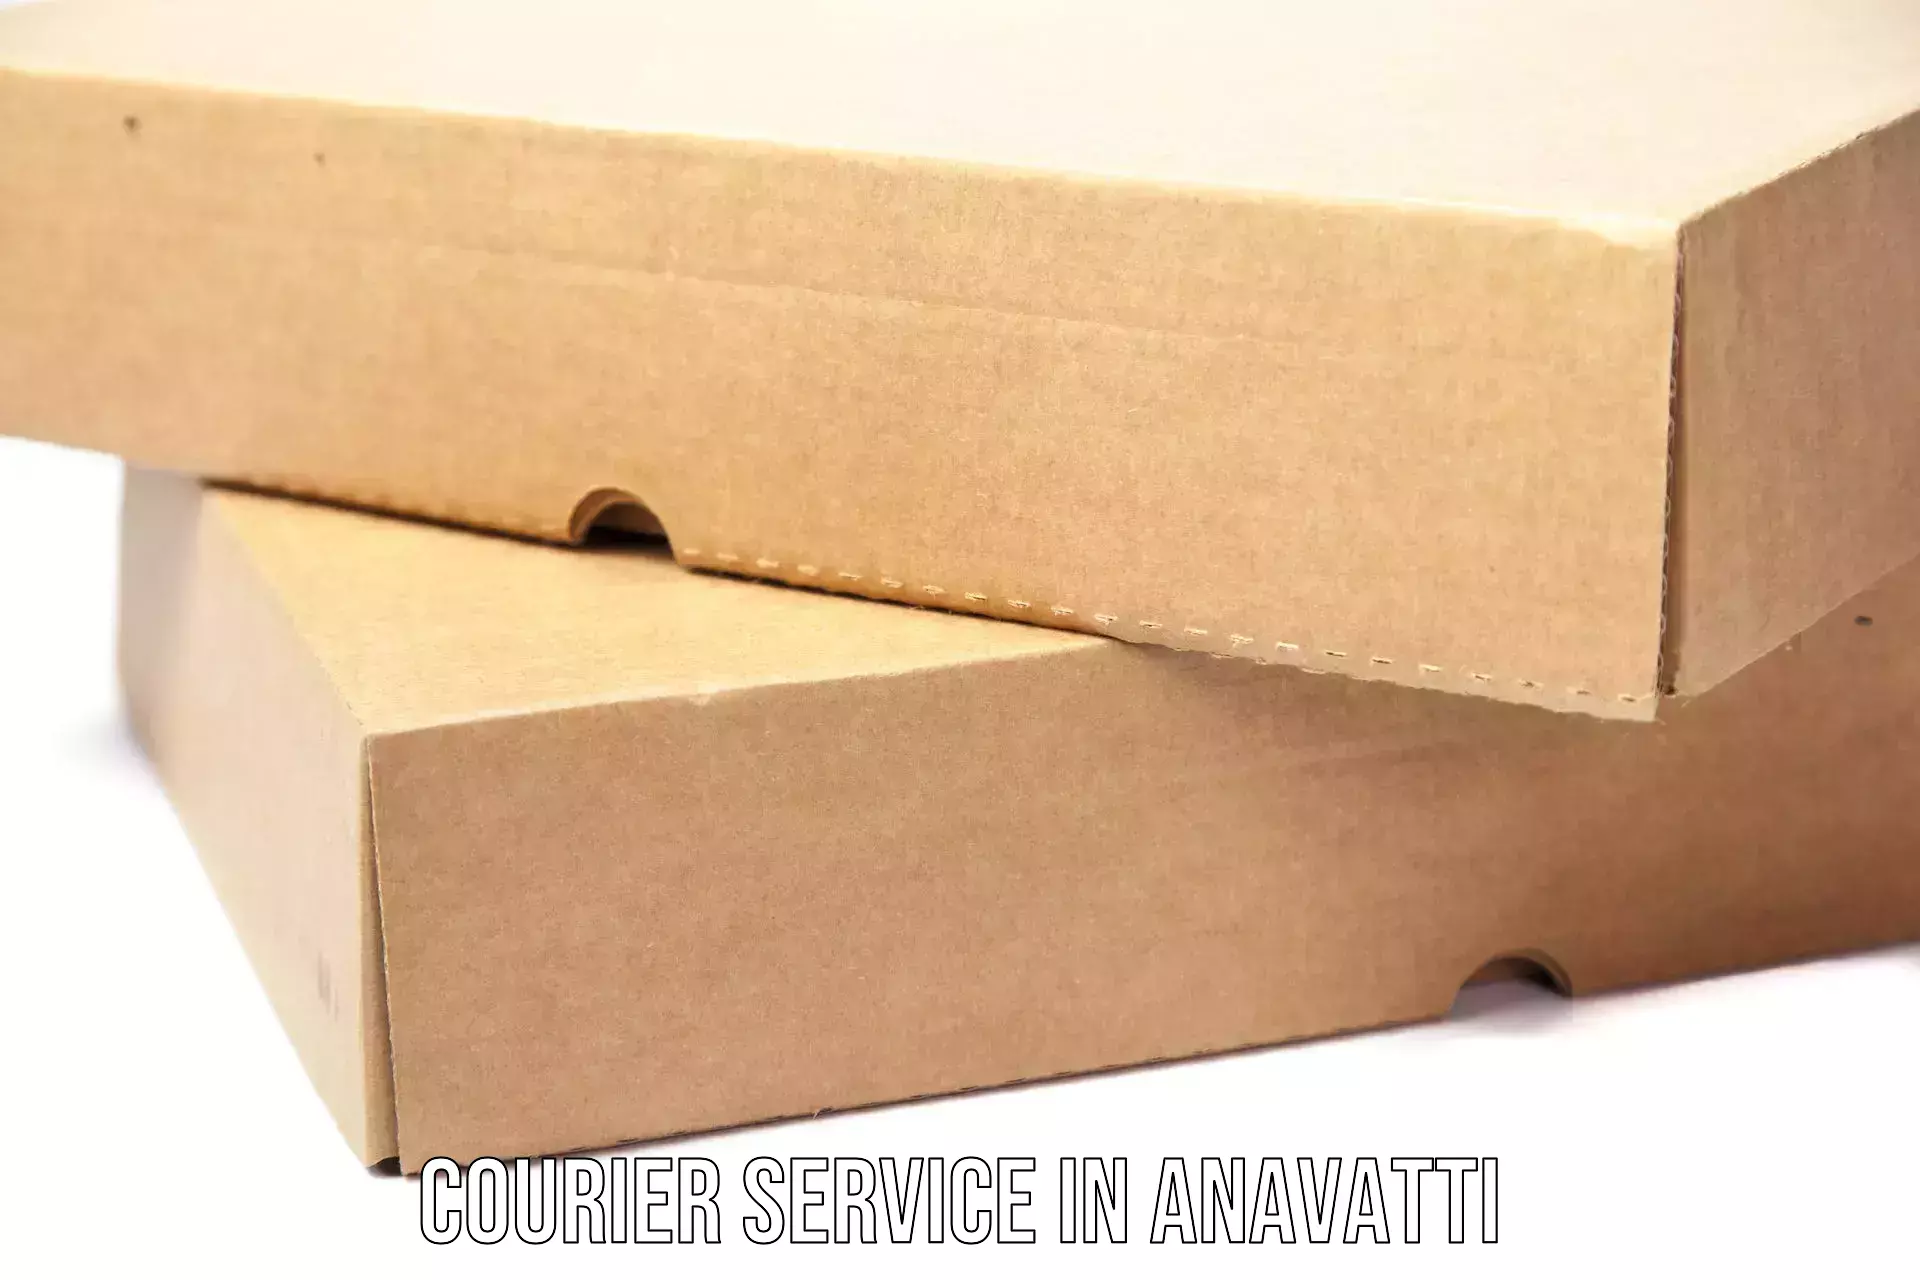 Rapid shipping services in Anavatti